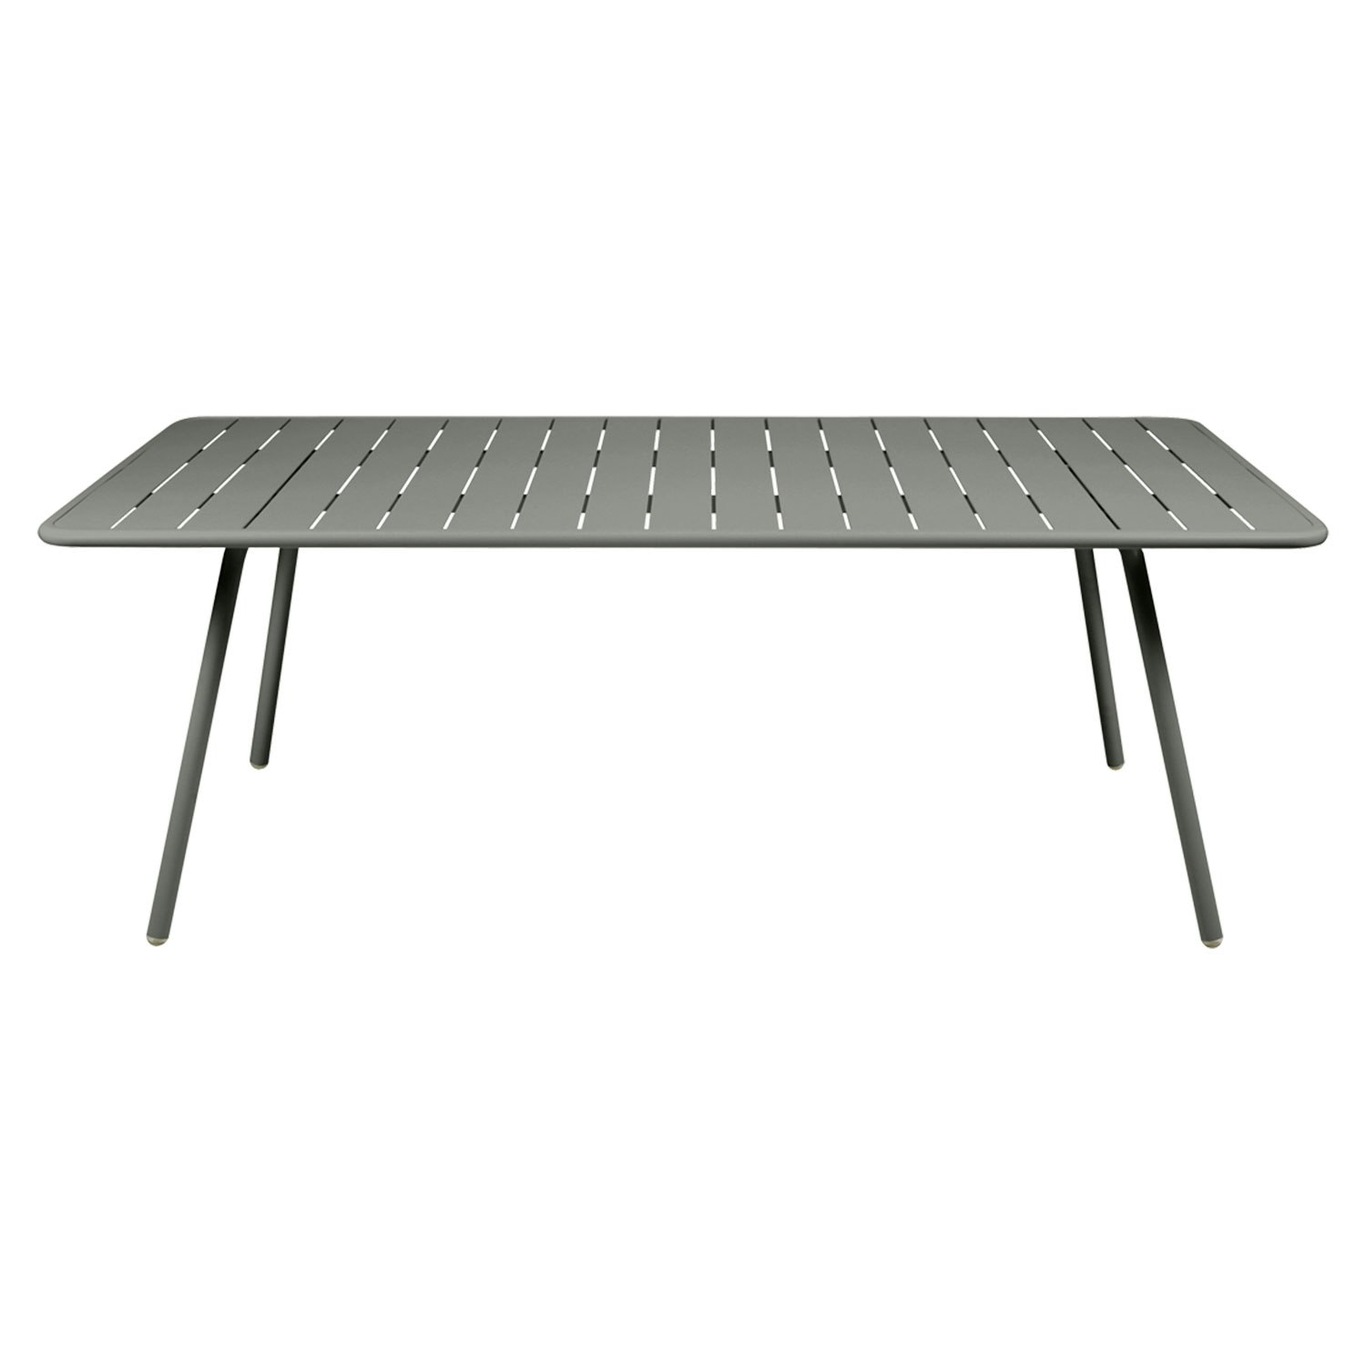 Luxembourg Table 207x100, Rosemary